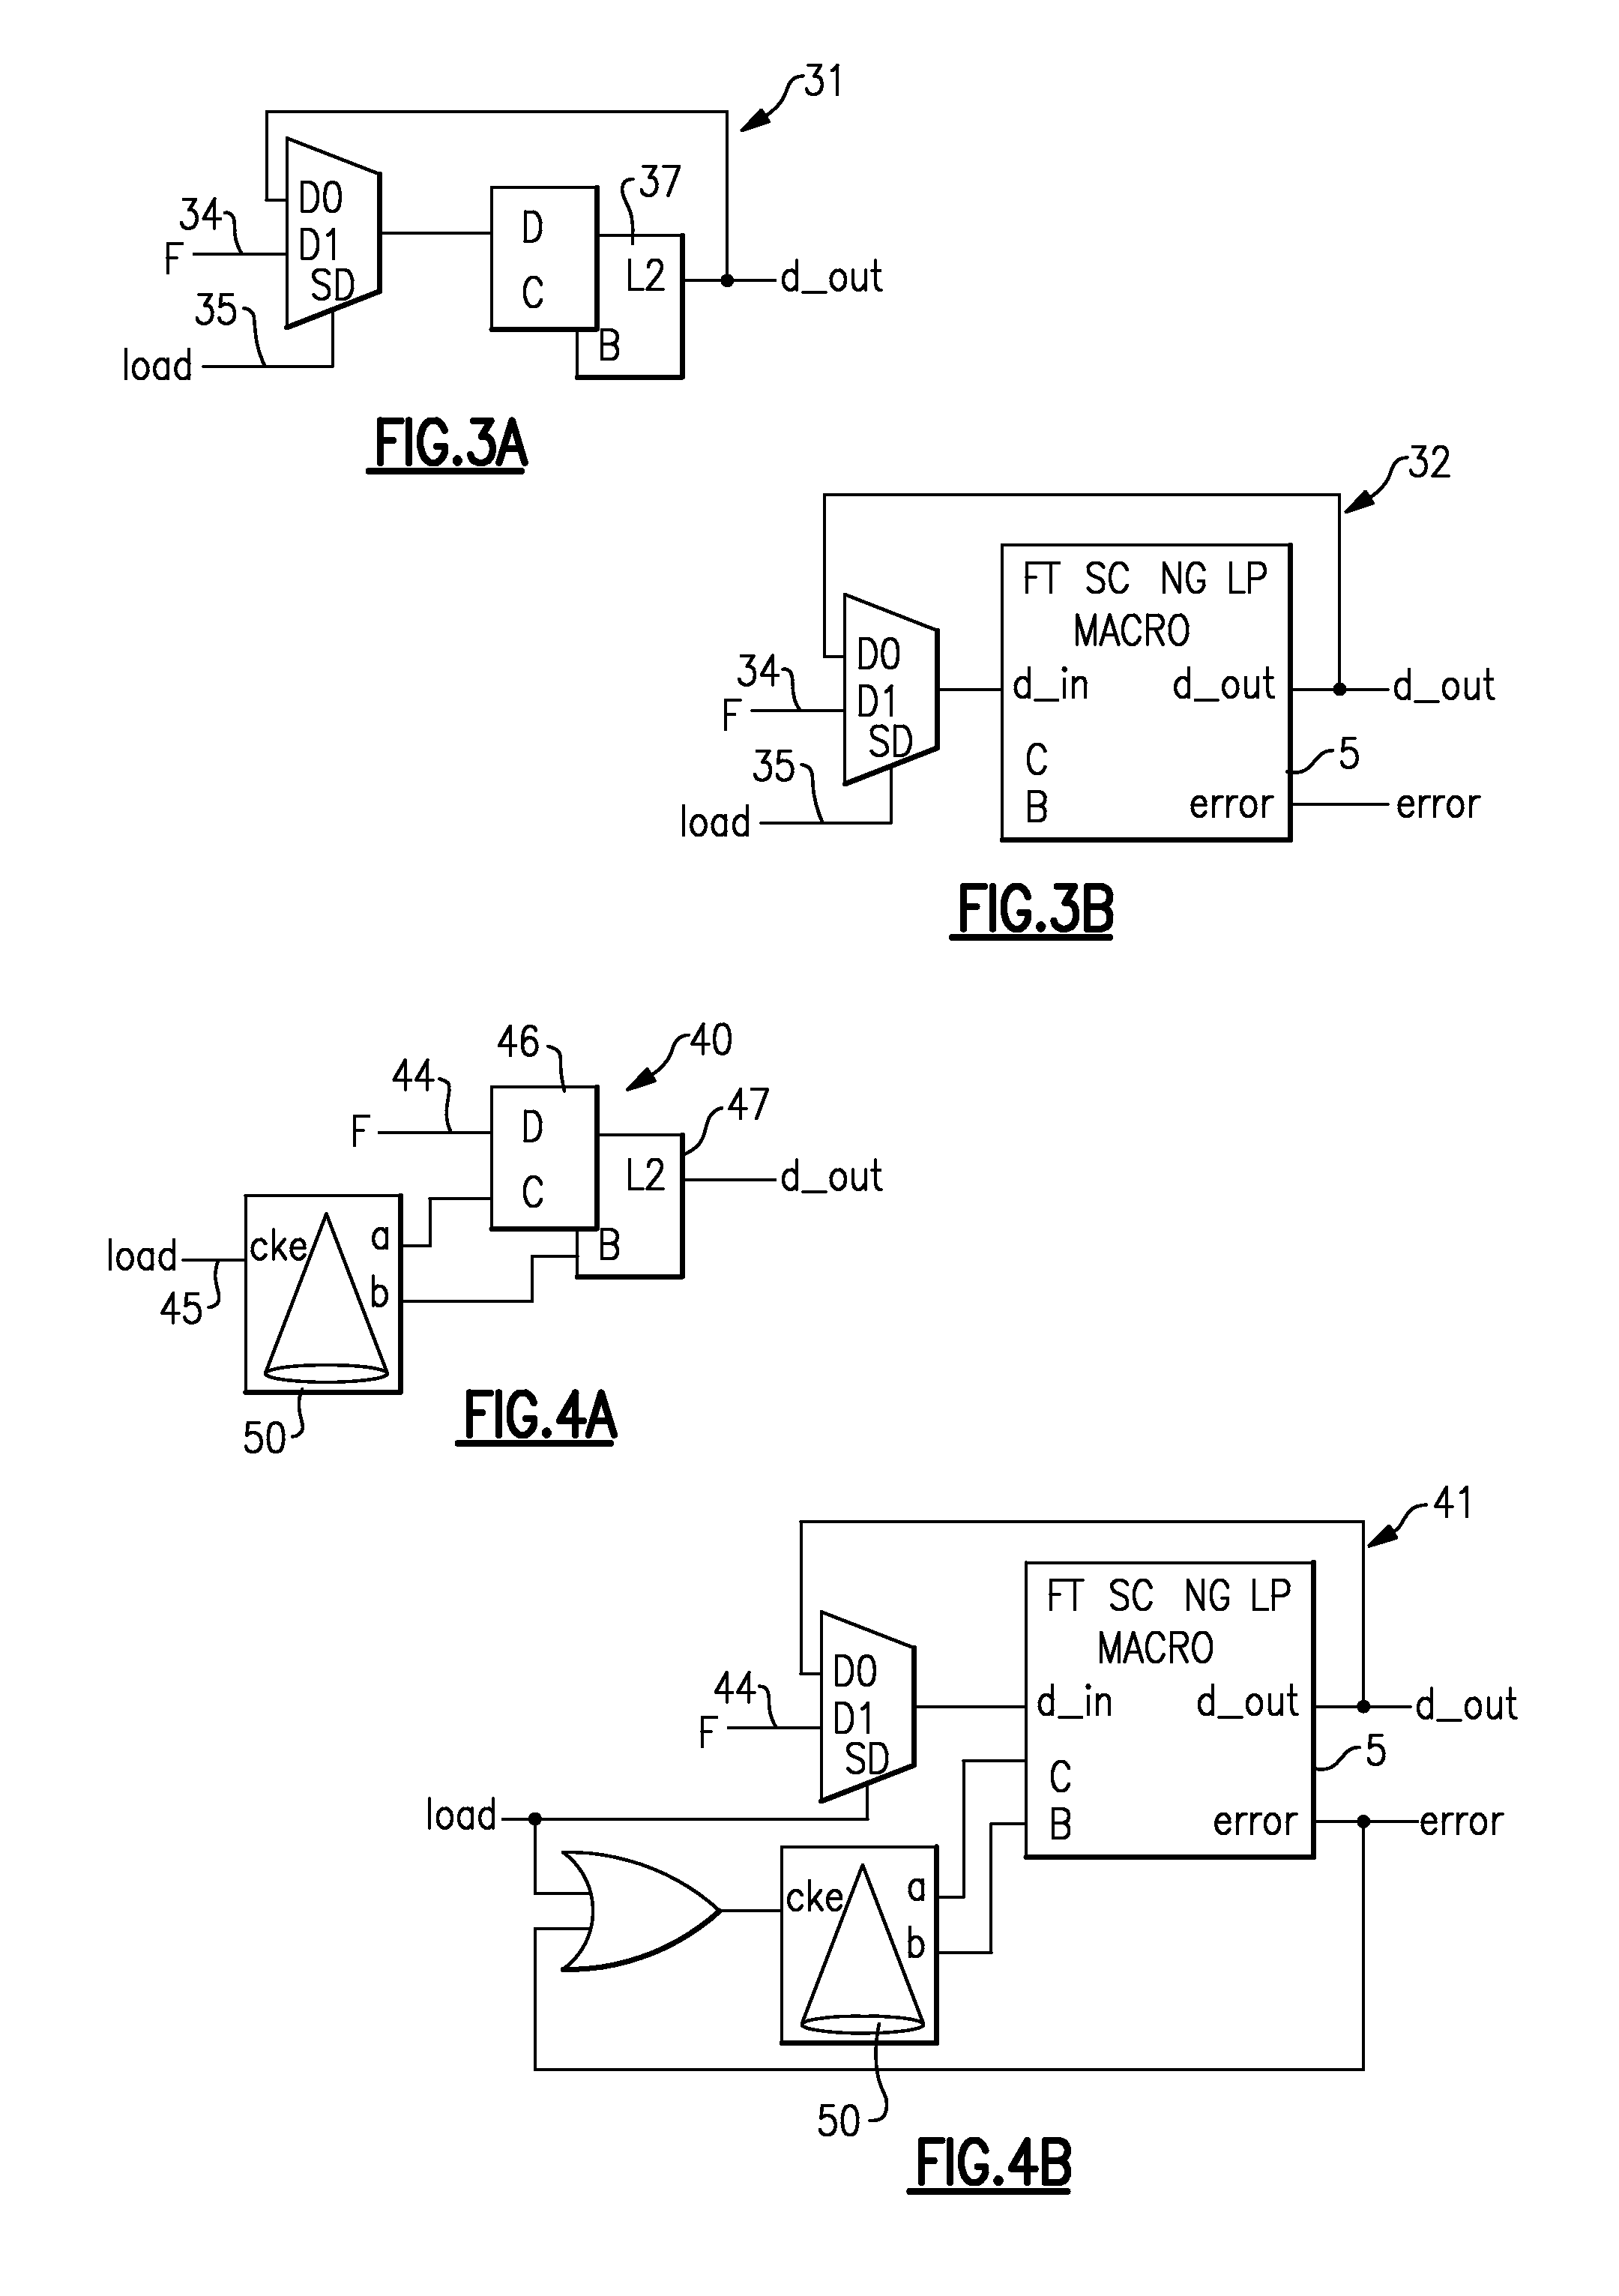 Fault Tolerant Self-Correcting Non-Glitching Low Power Circuit for Static and Dynamic Data Storage